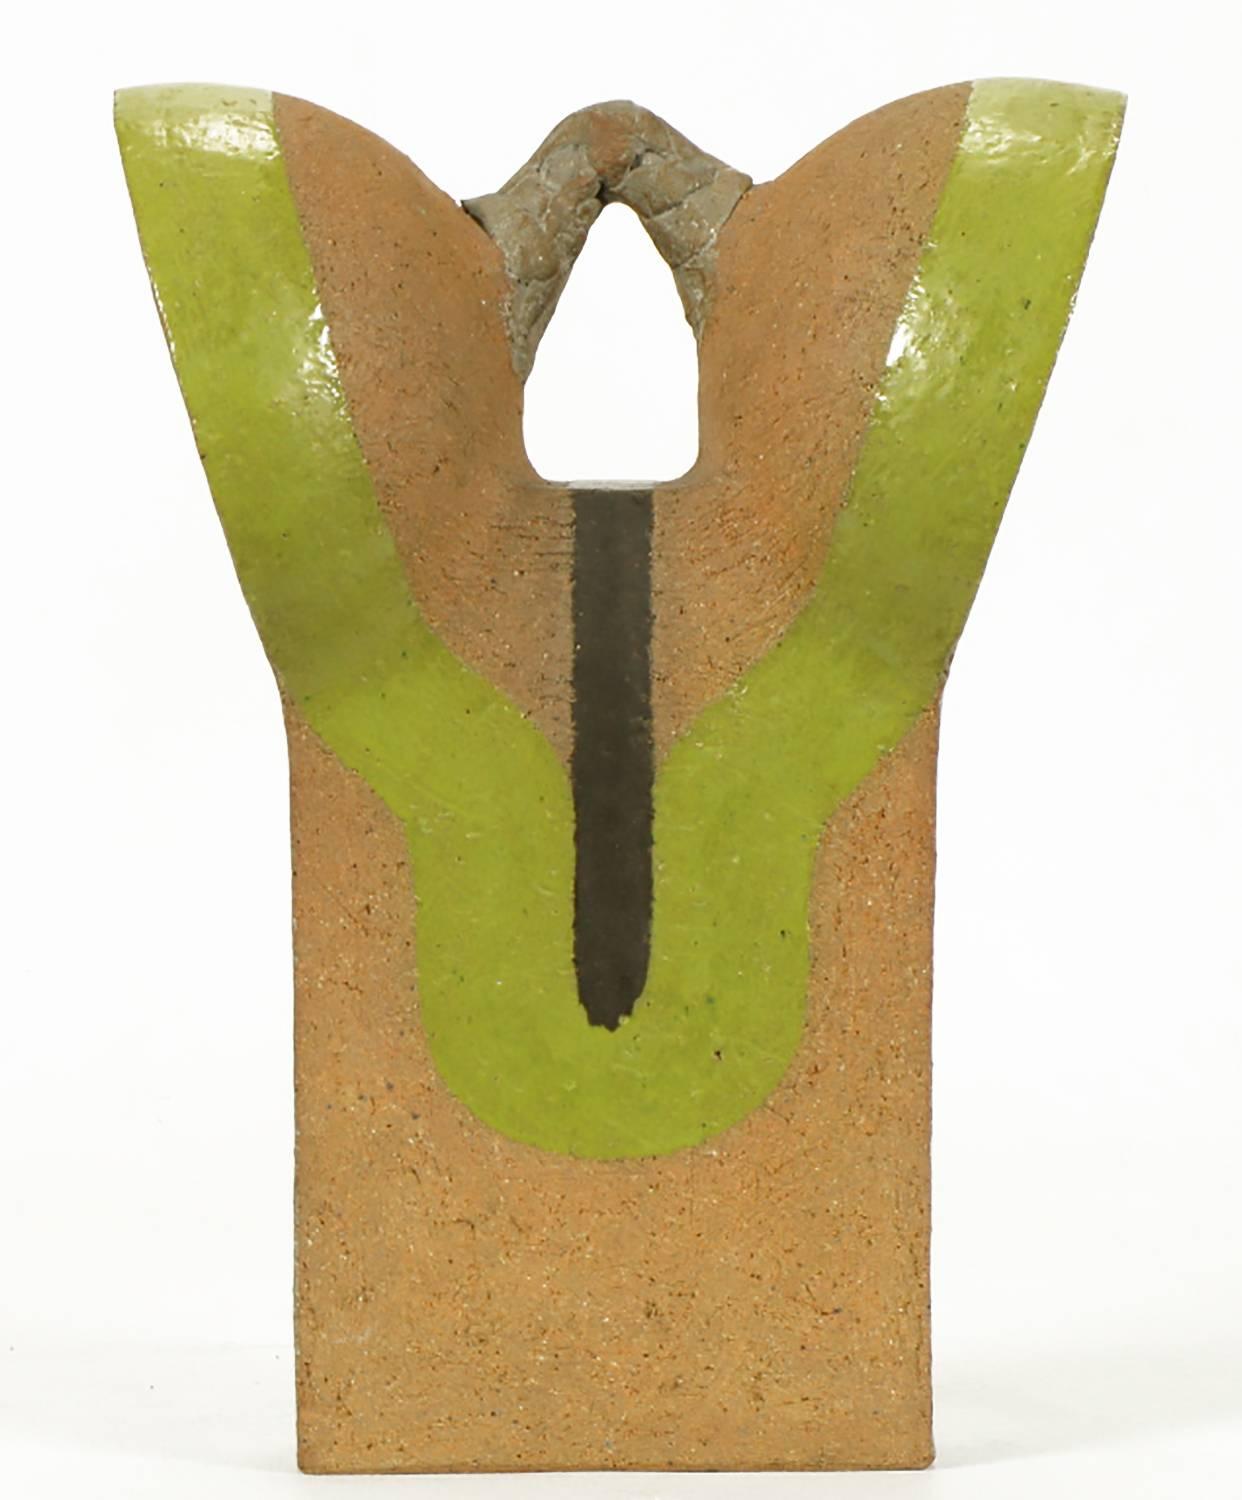 Tomiya Matsuda (1939-2011) terra cotta and earthen pottery abstract ceramic sculpture with chartreuse and black glaze. Multi dimensional piece that changes shape with each turn.

From the estate of William August Hoffman, a professor of ceramics